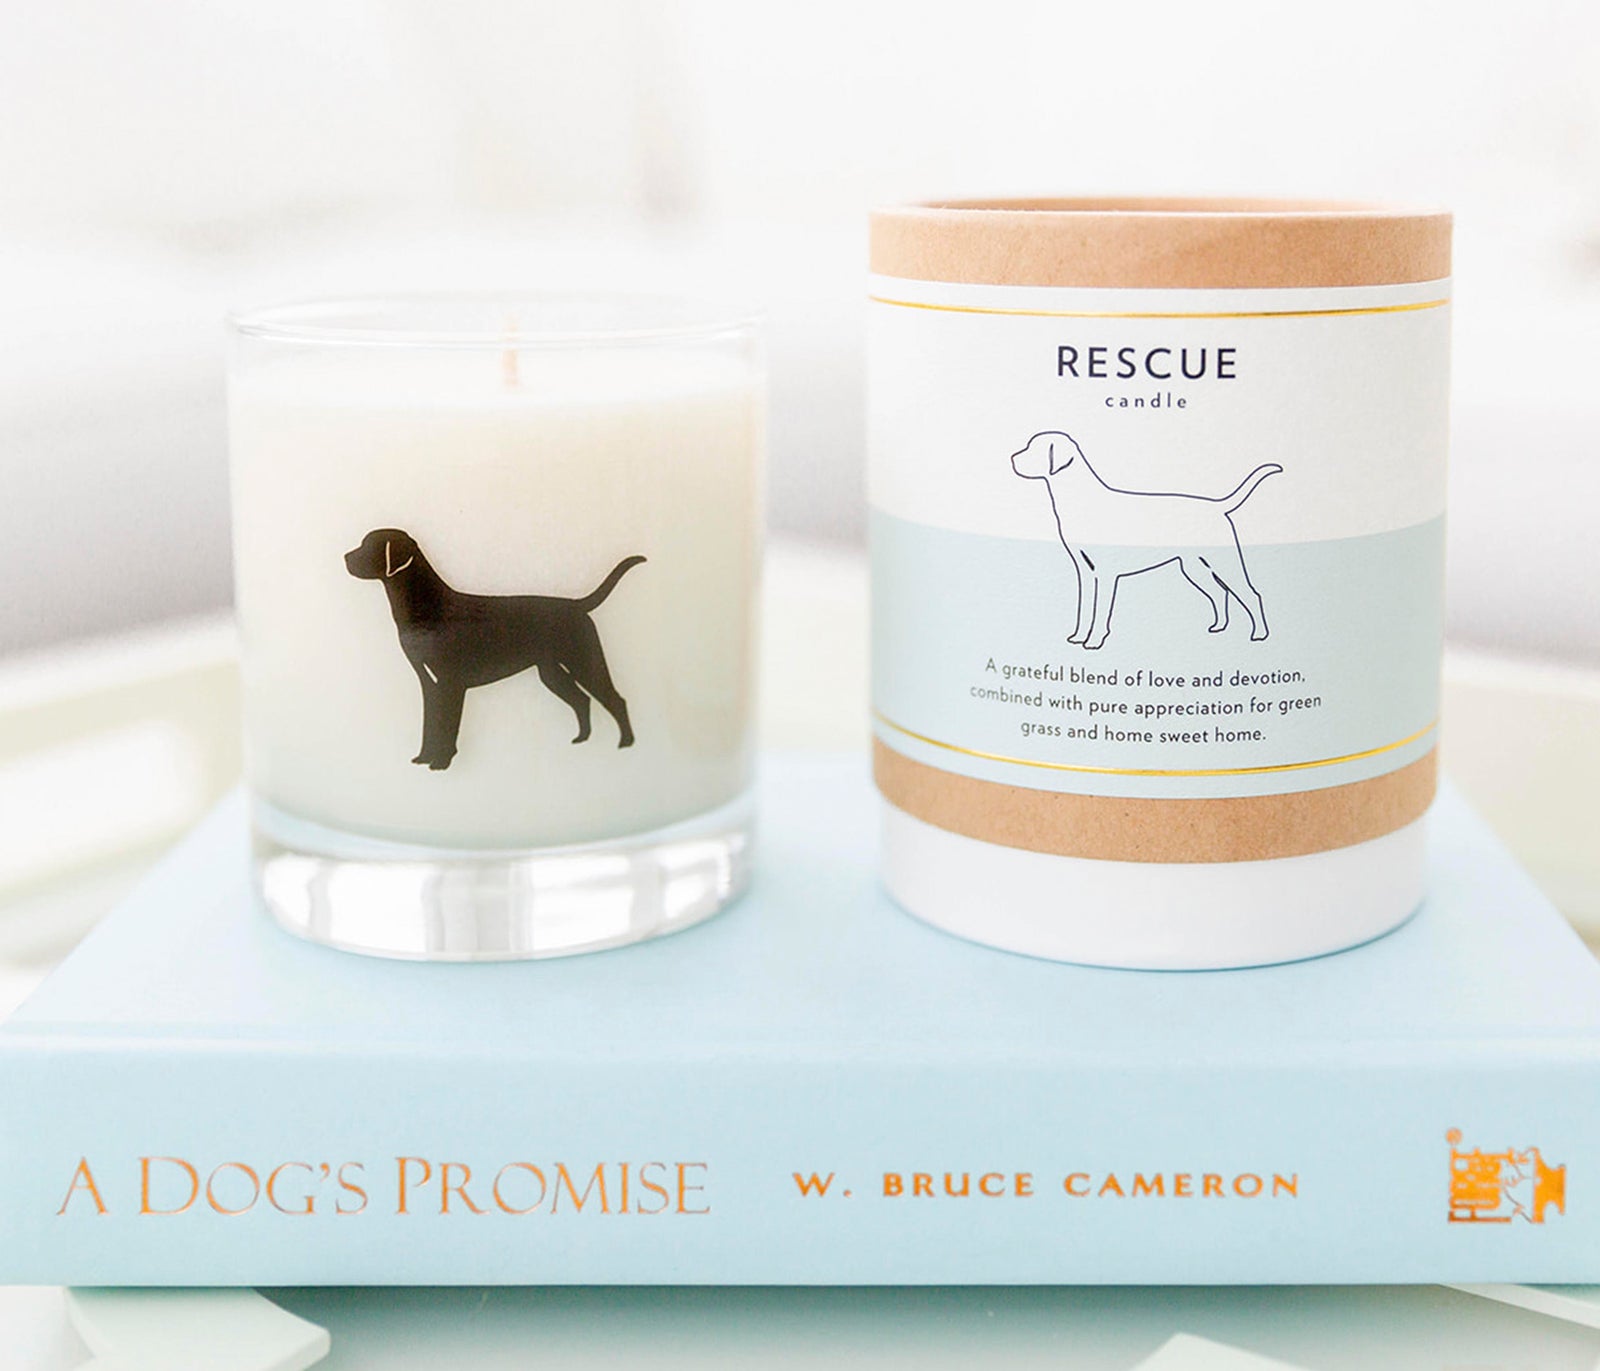 Scripted Fragrance Rescue Dog Candle